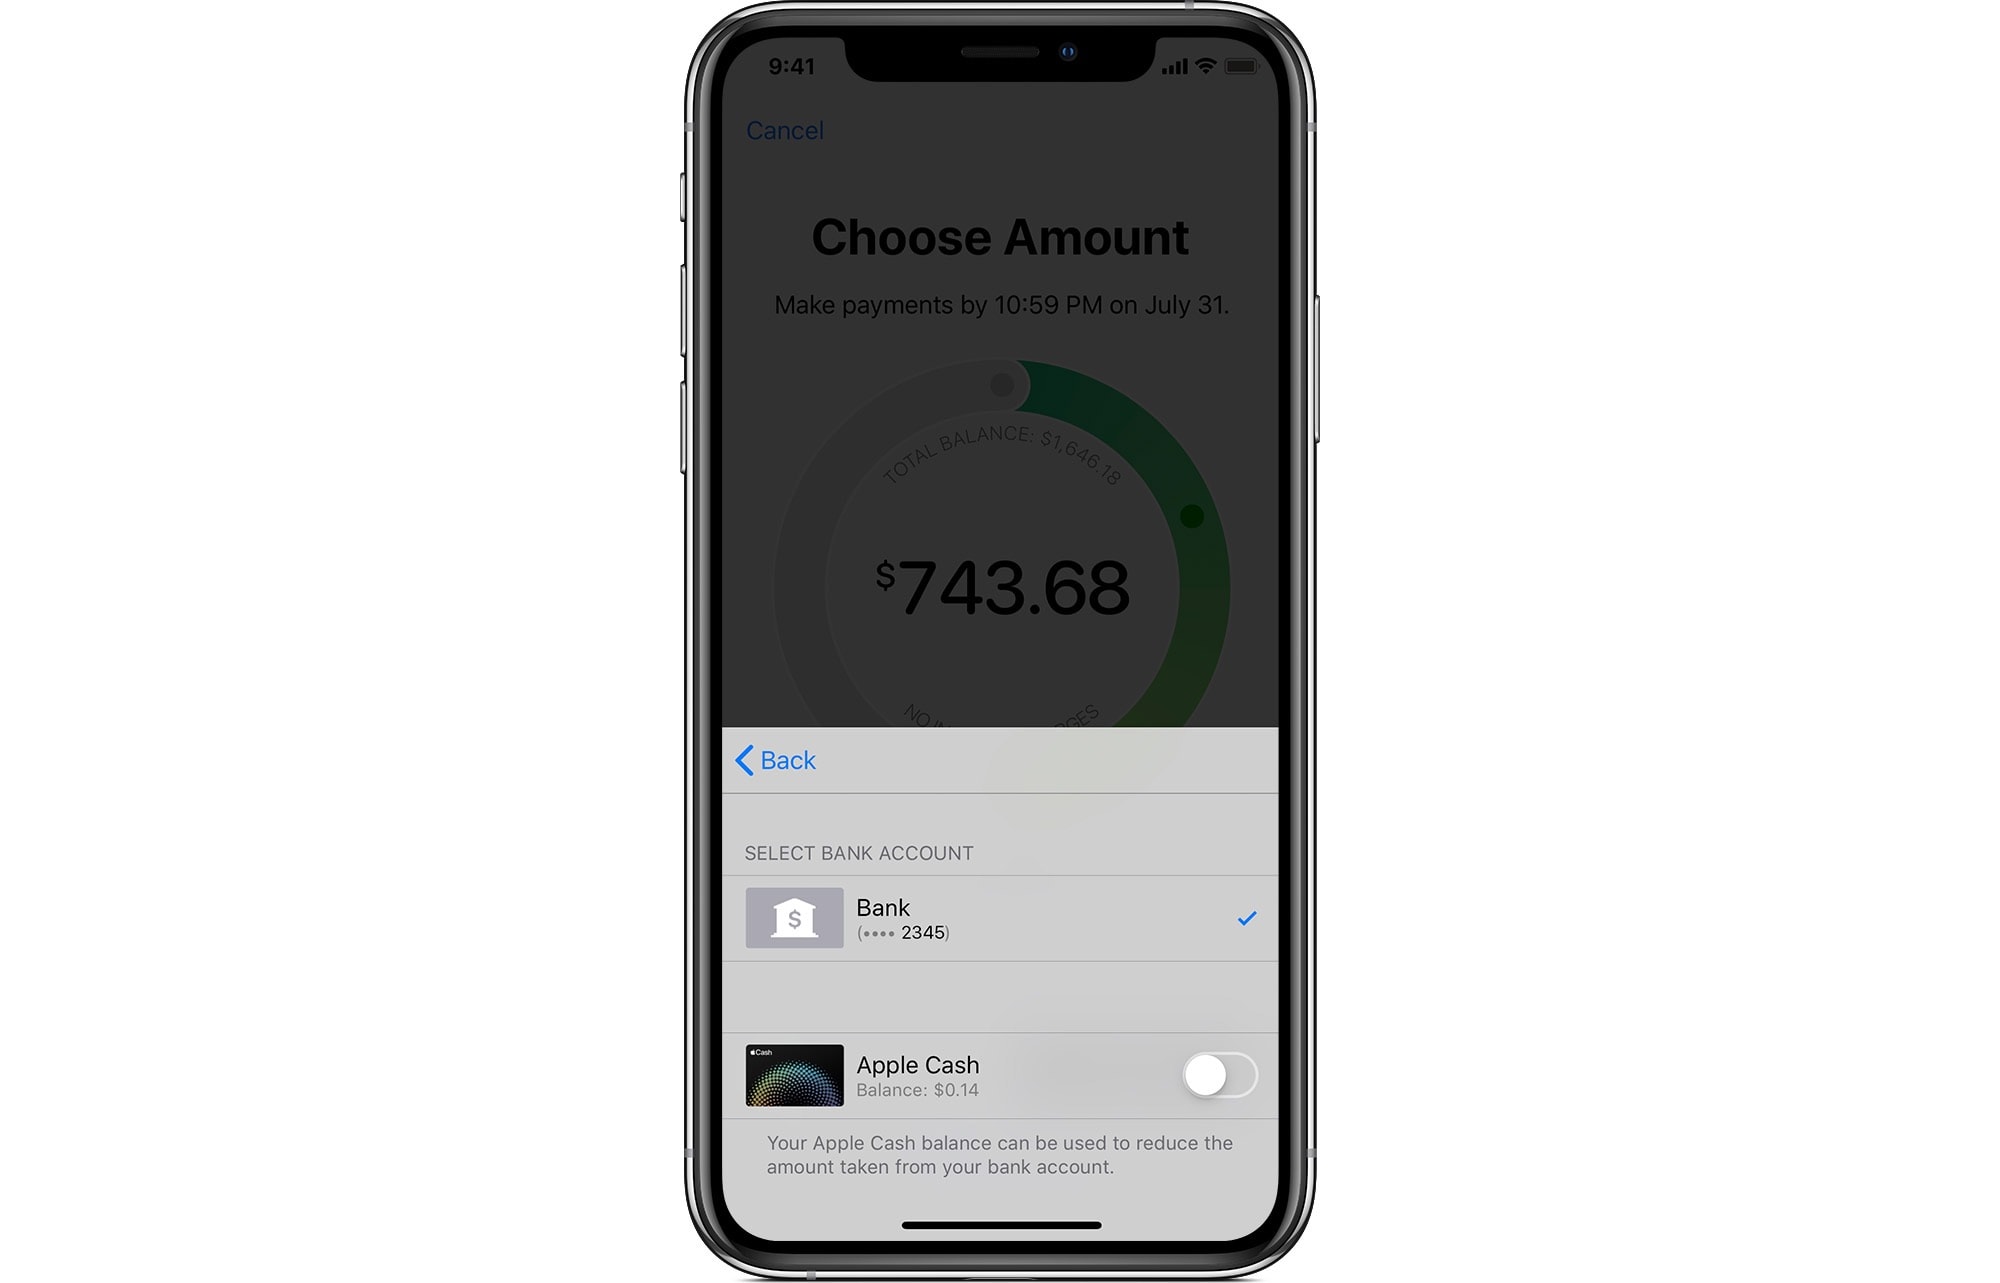 You can use your Apple Cash balance to pay off your credit card balance.